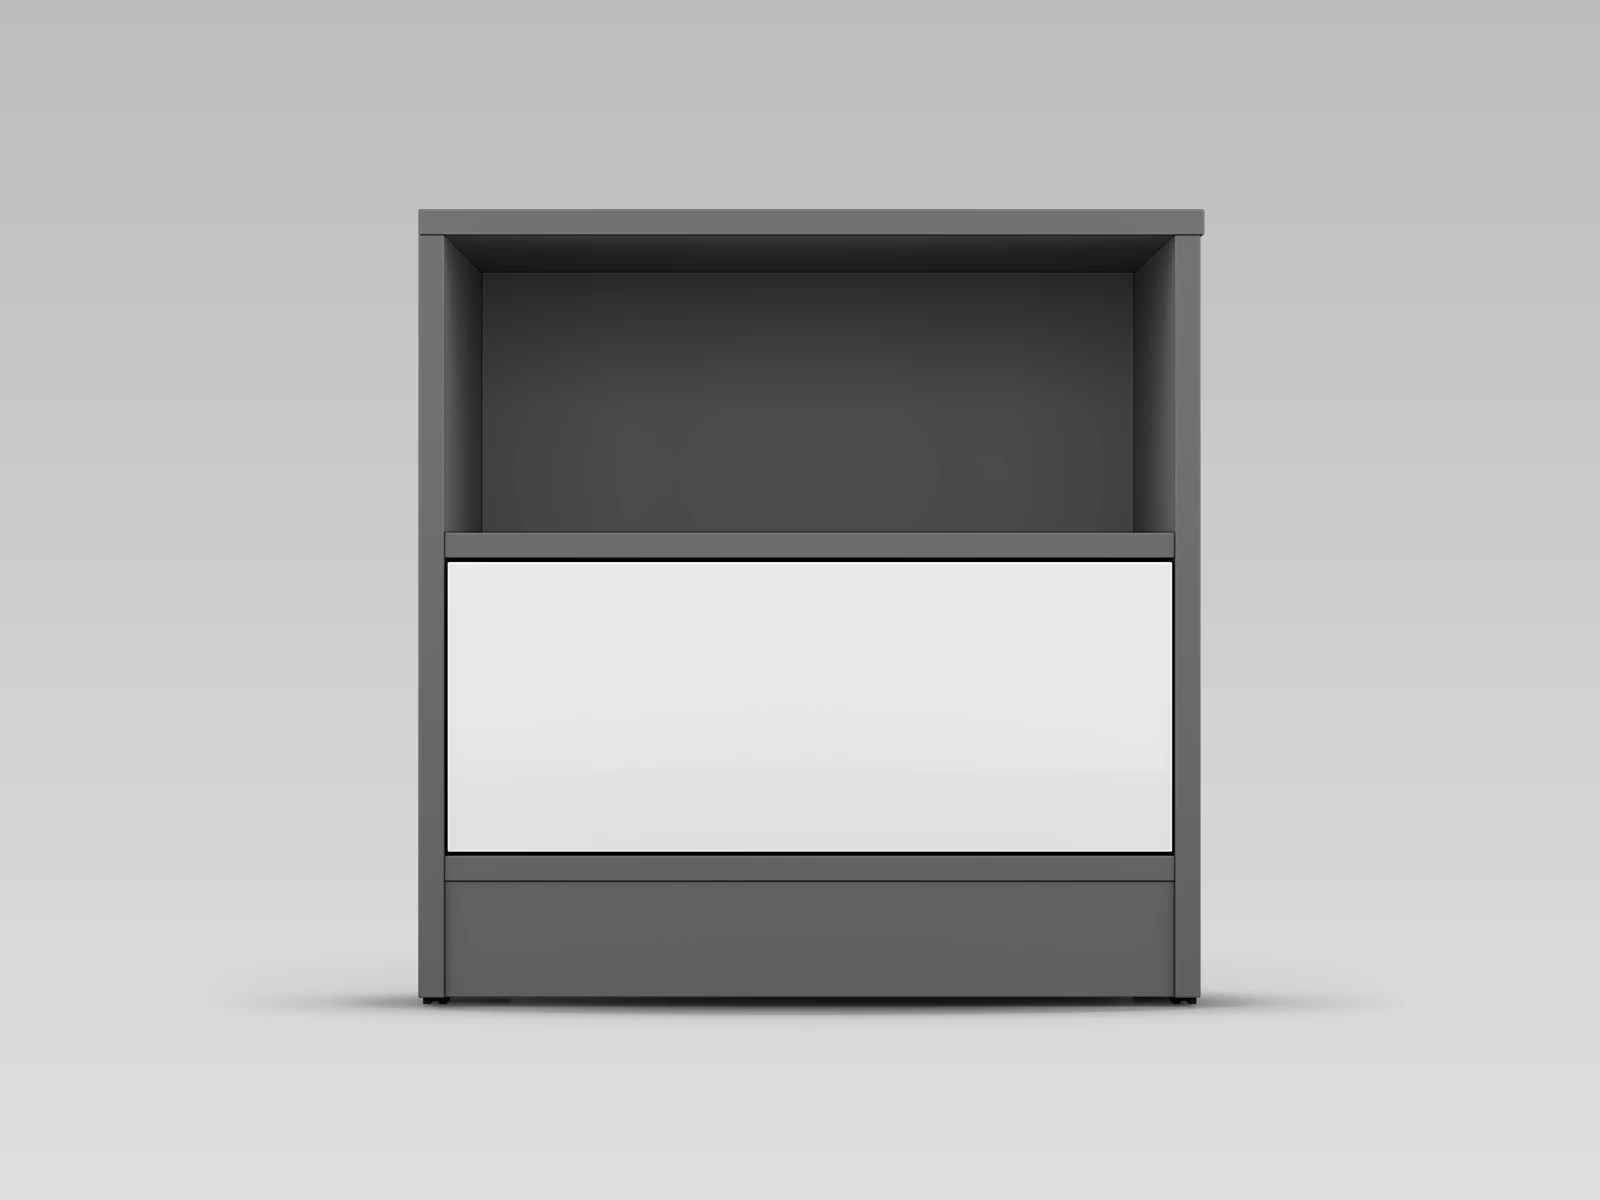 1 Bedside table Standard Anthracite / White Gloss